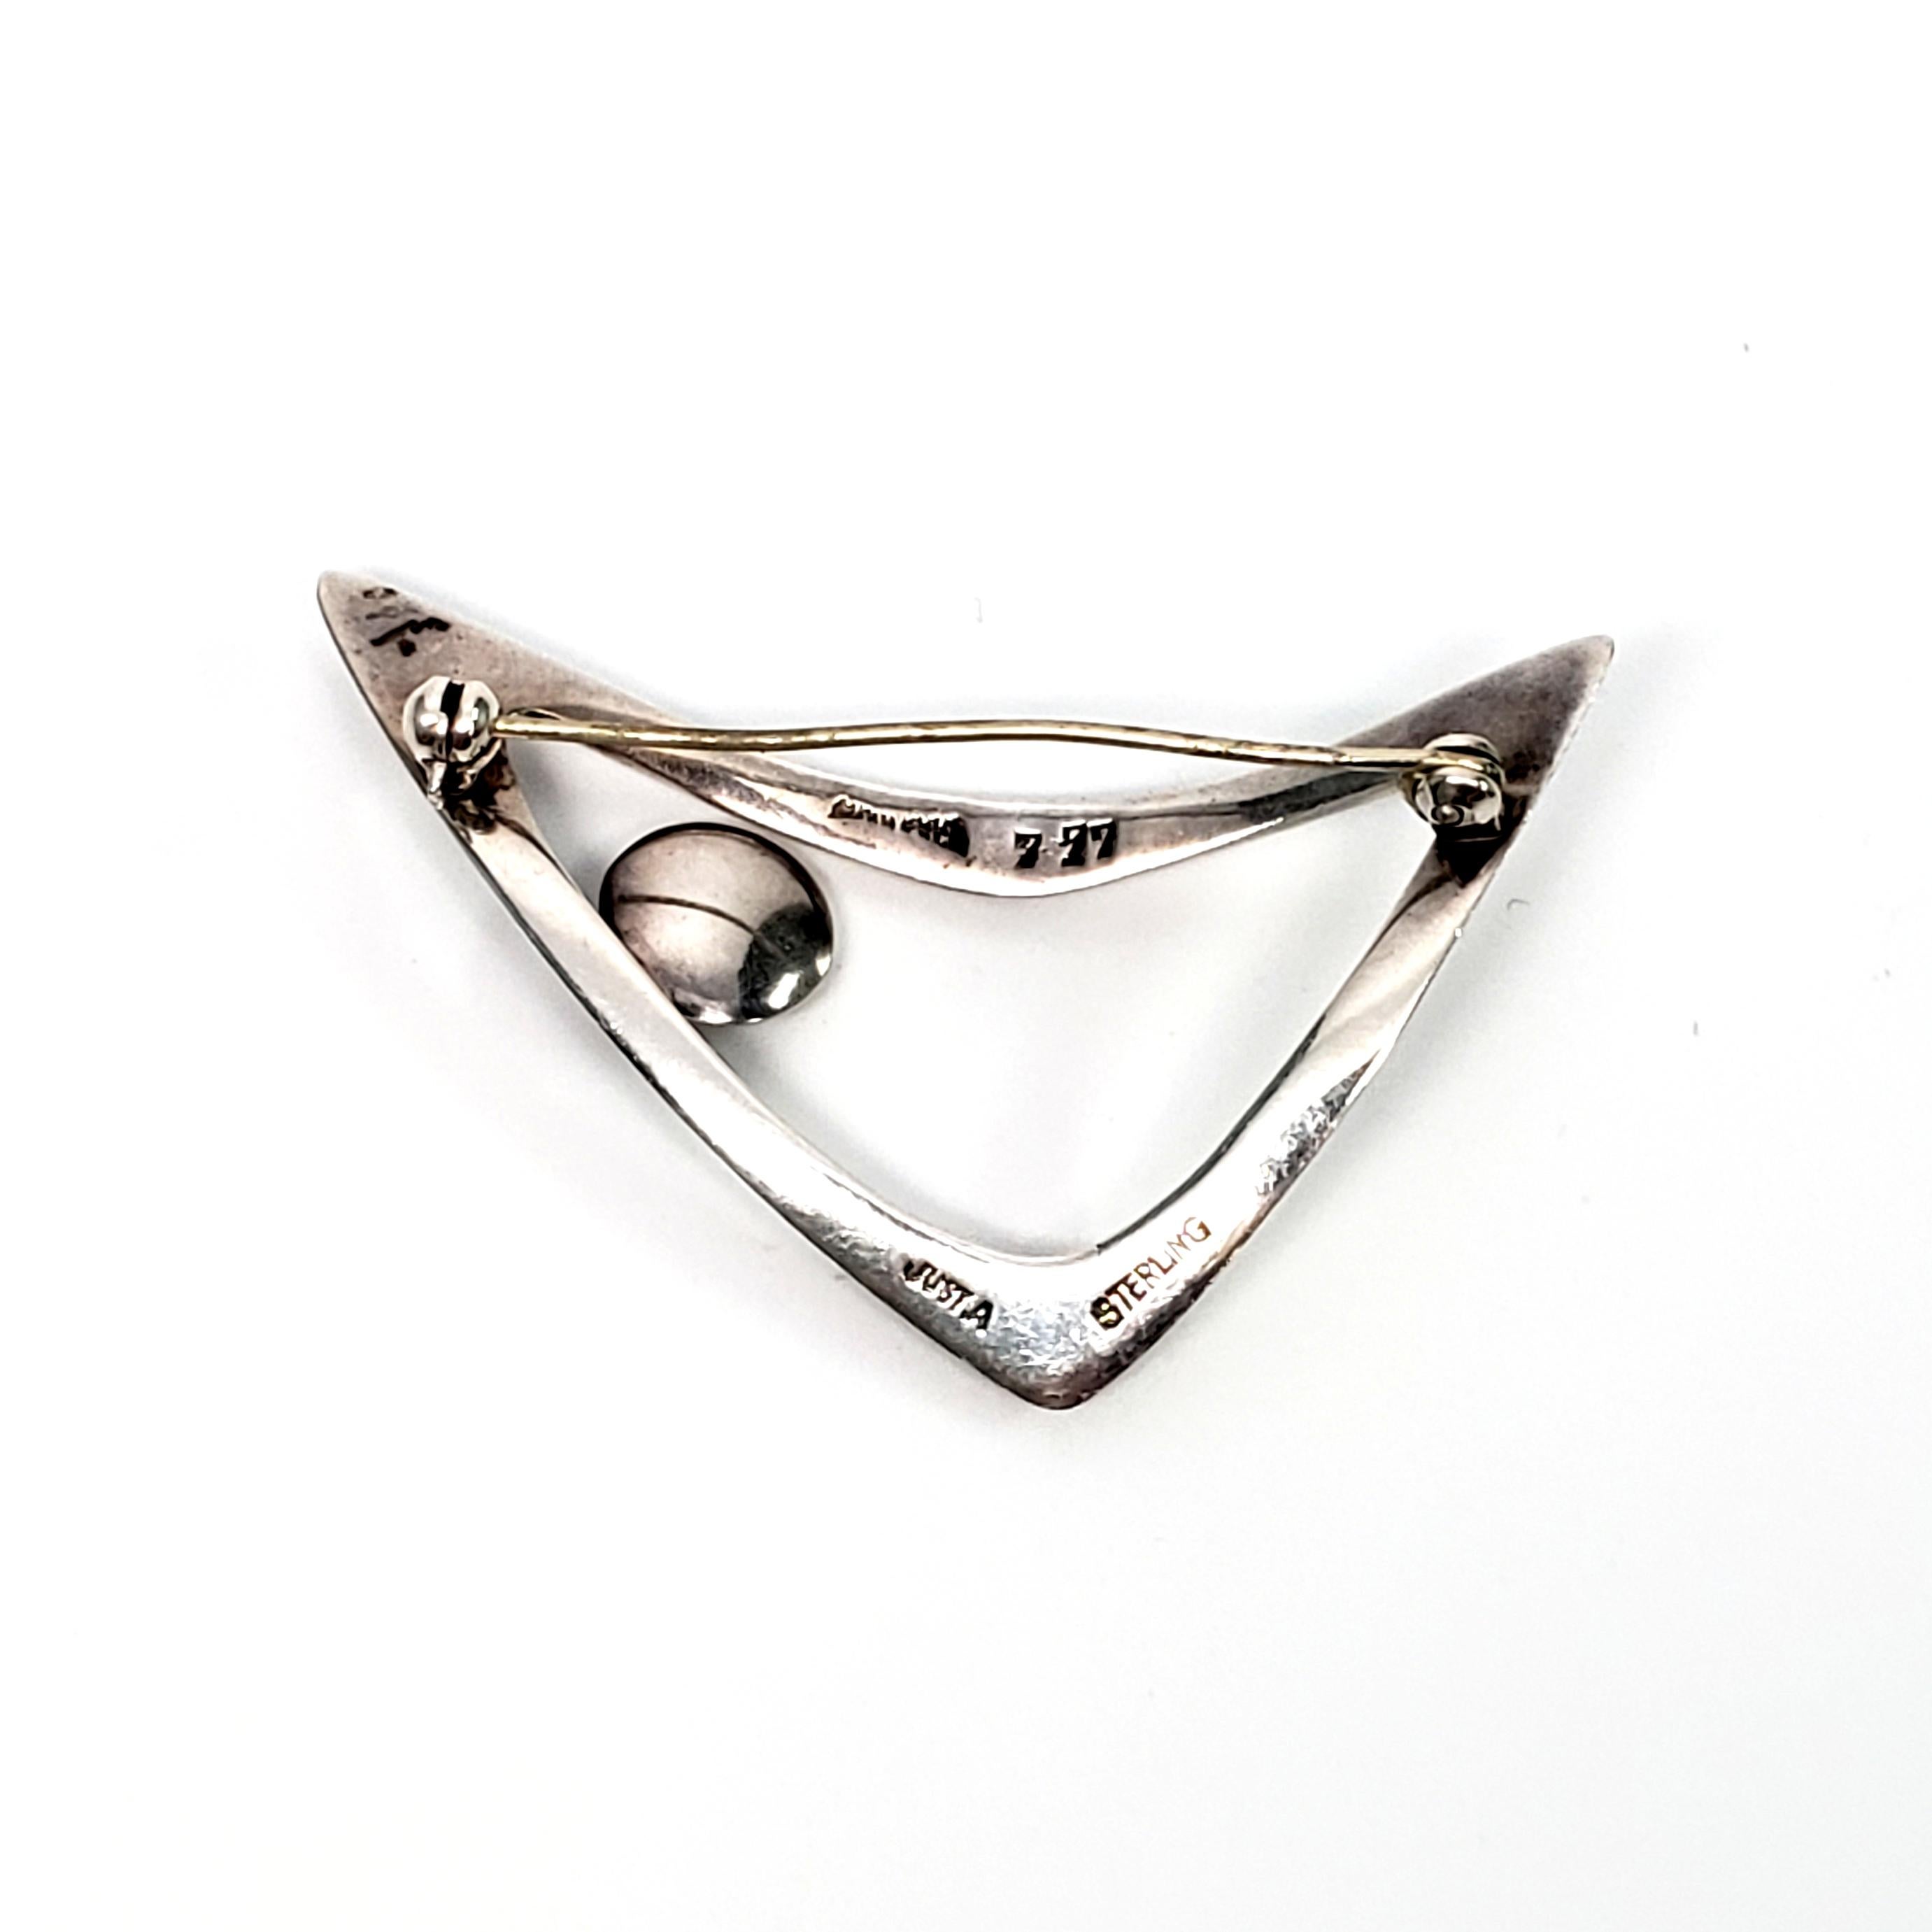 Just Andersen Denmark Sterling Silver Modernist Boomerang Pin #777 In Good Condition For Sale In Washington Depot, CT